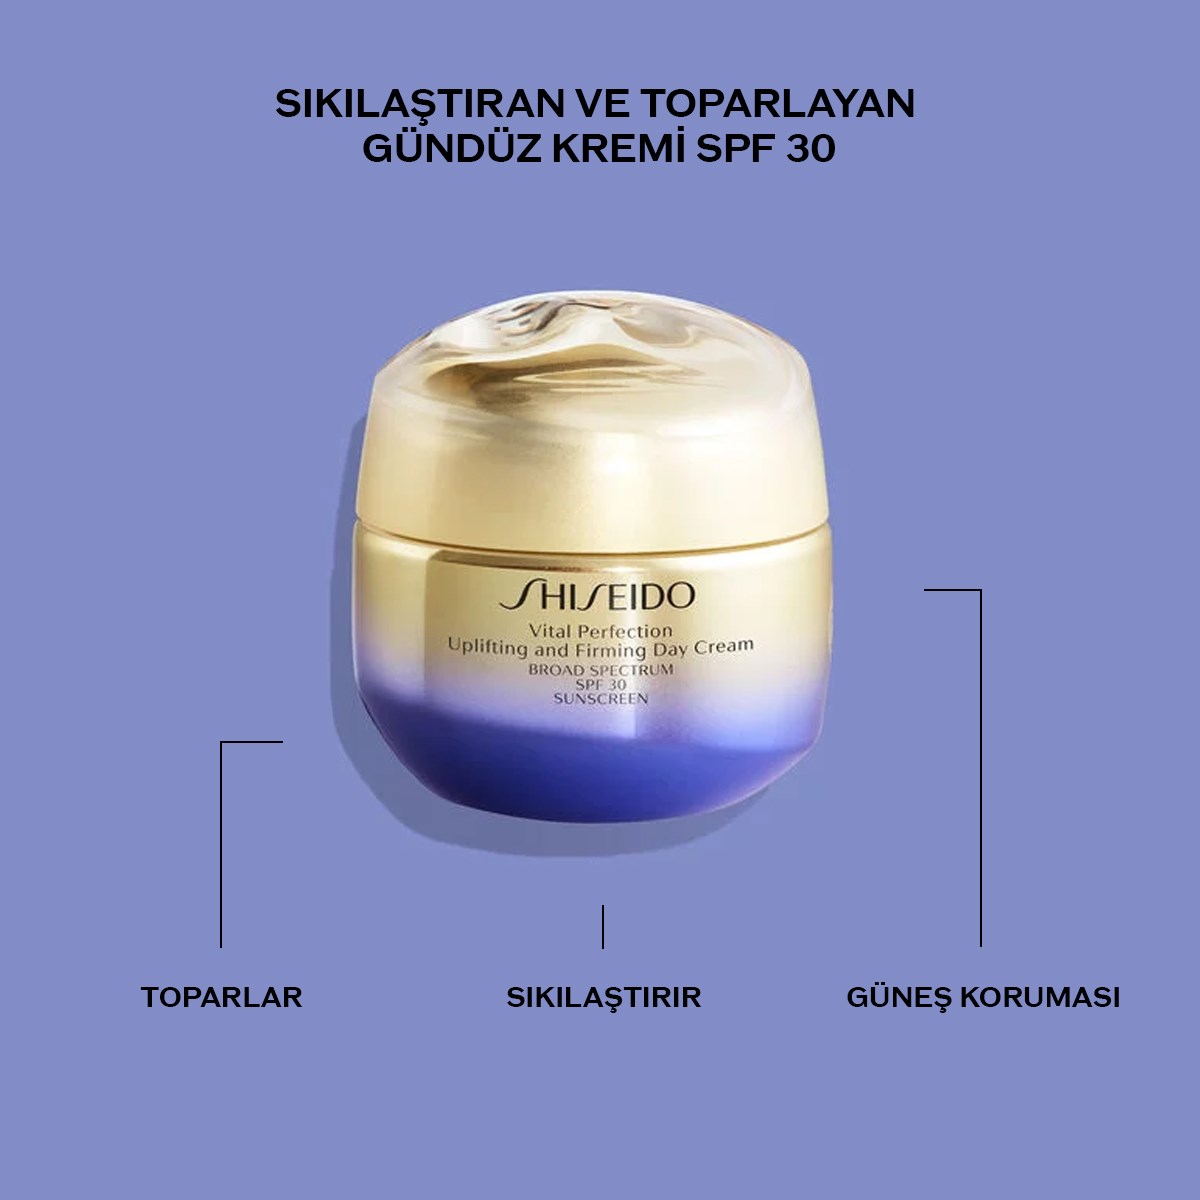 VITAL PERFECTION UPLIFTING AND FIRMING DAY CREAM SPF30 5